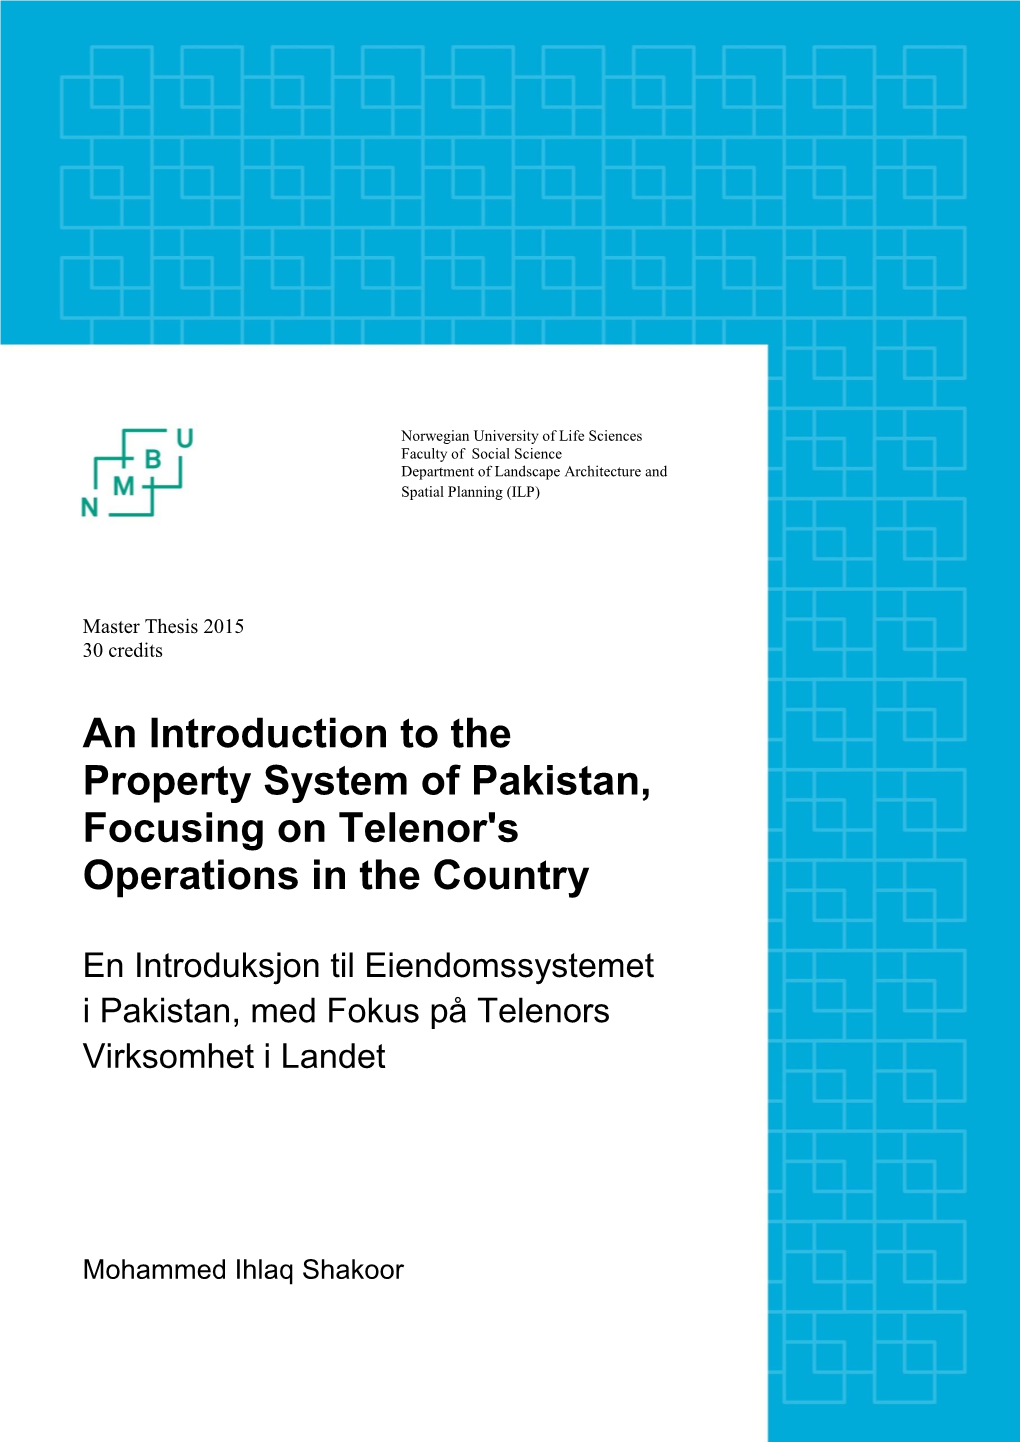 An Introduction to the Property System of Pakistan, Focusing on Telenor's Operations in the Country